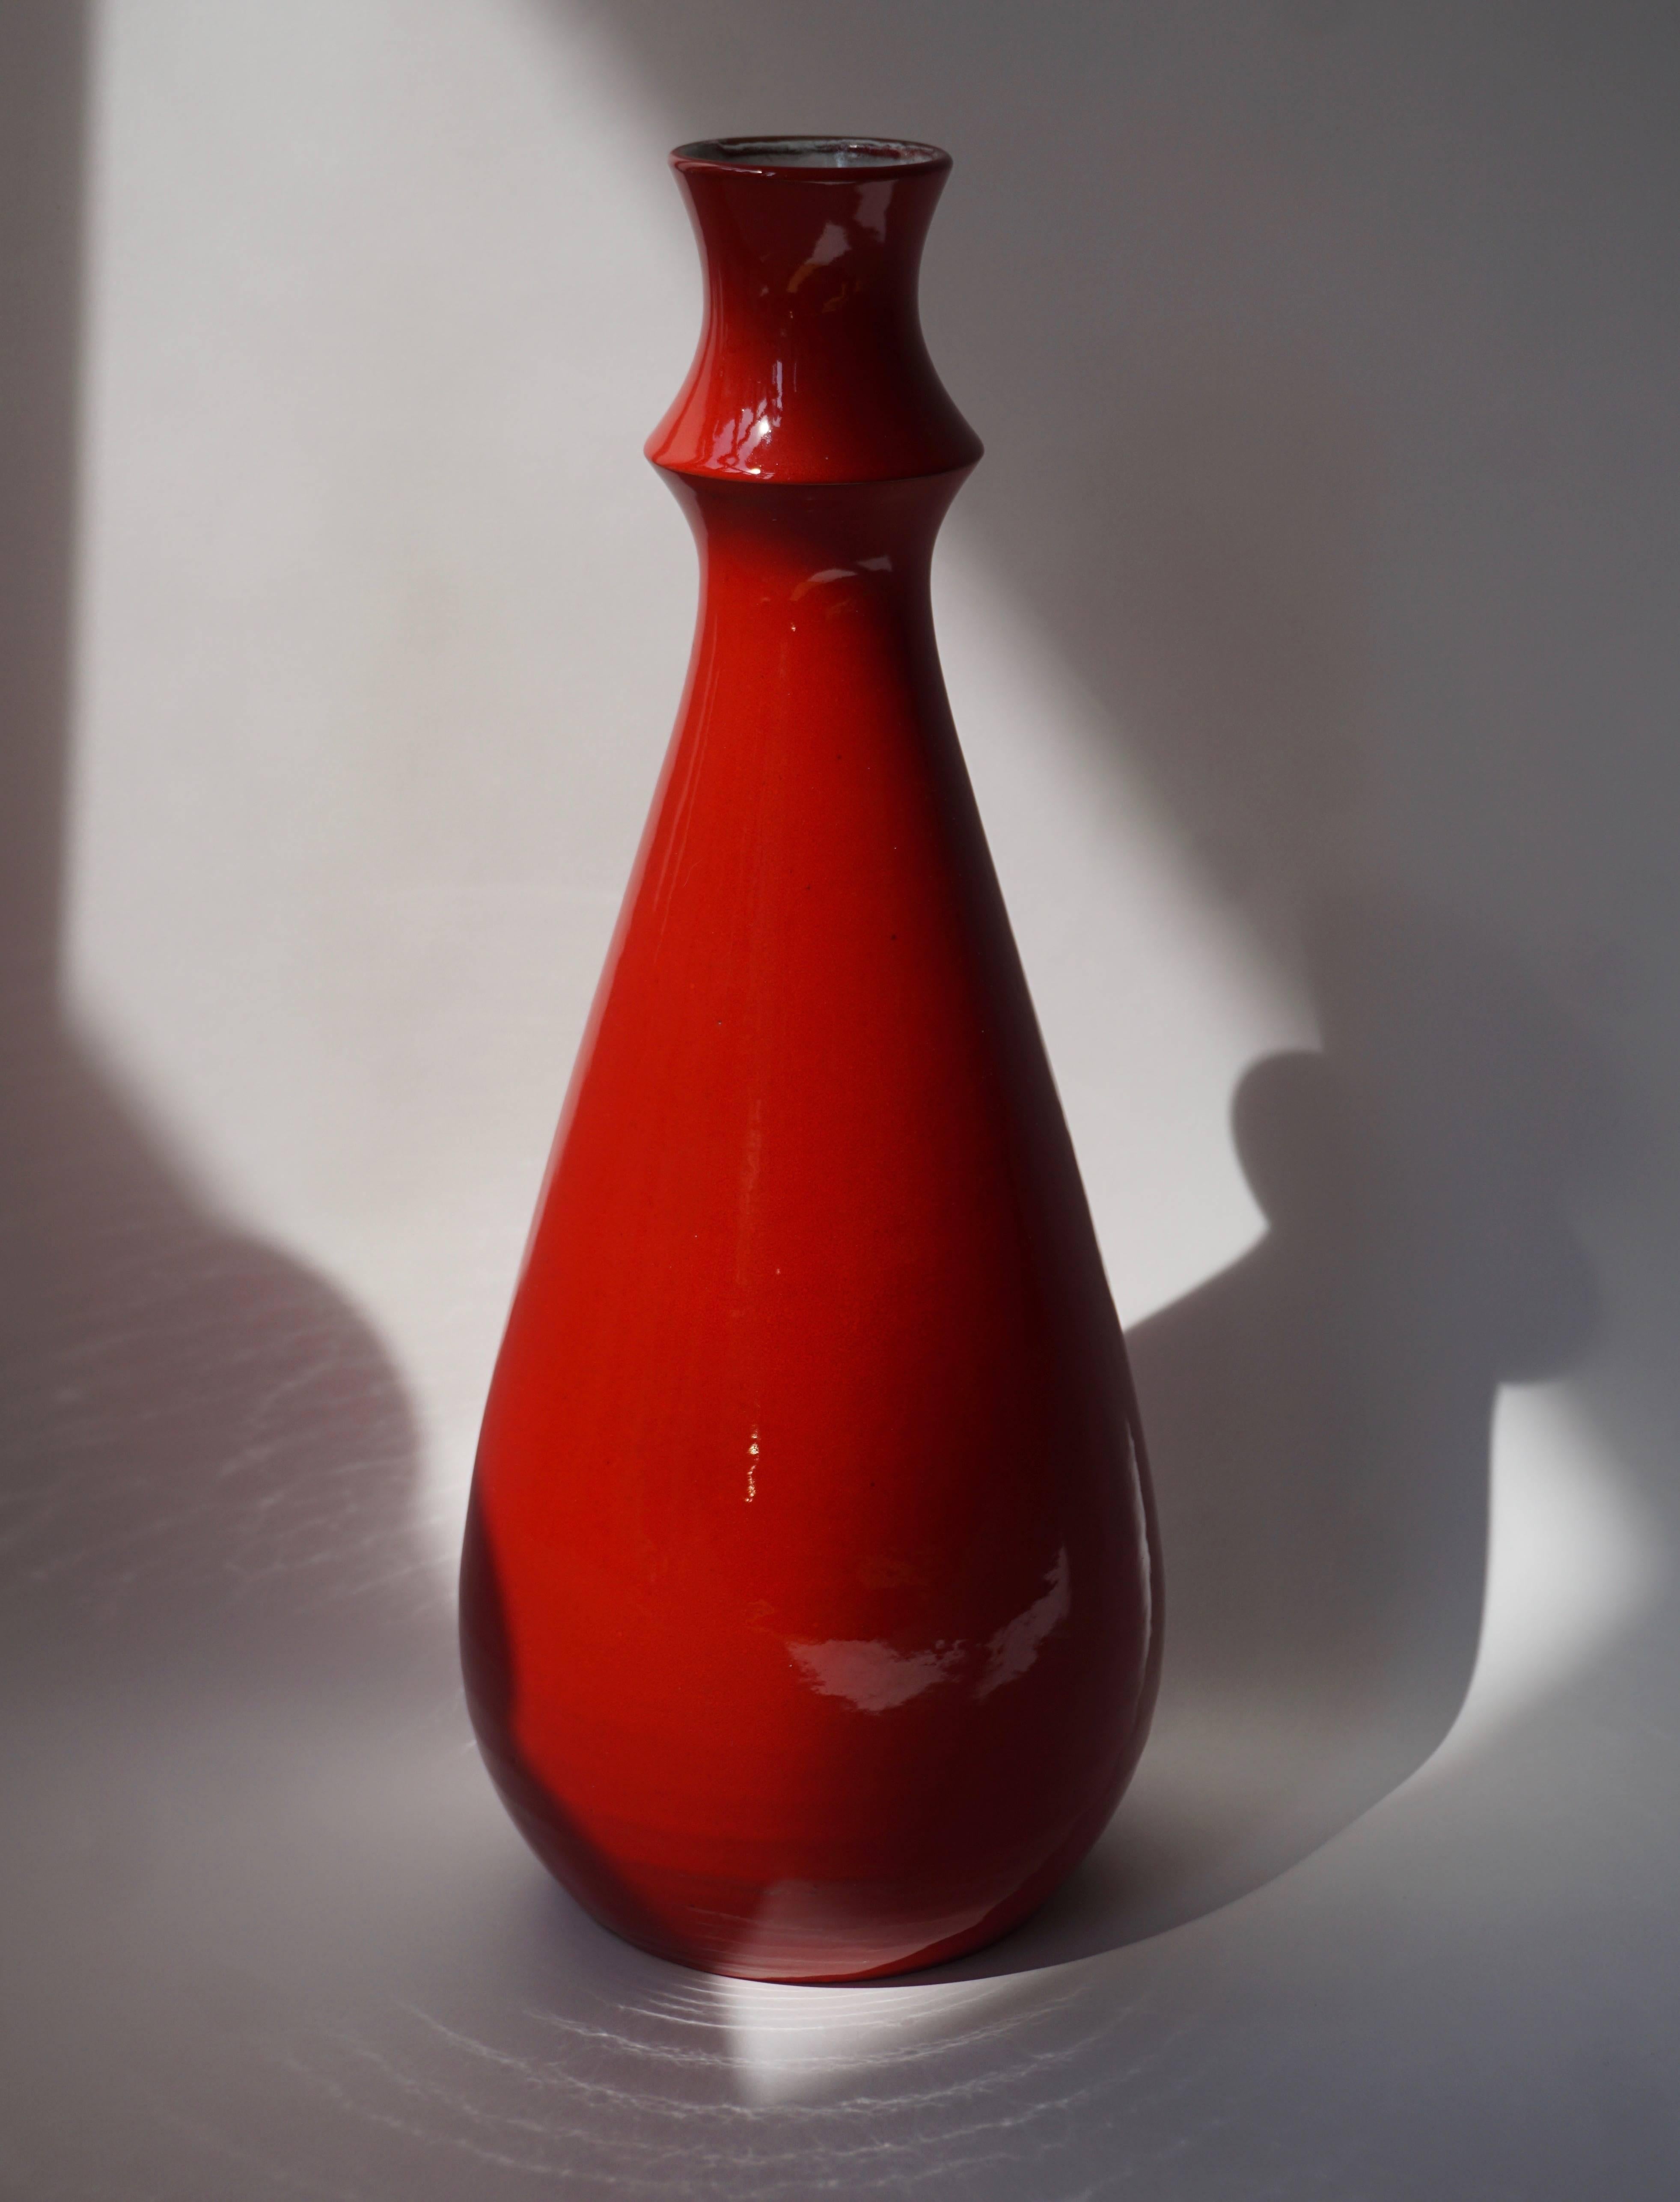 Two Italian red ceramic vases.
Measures: Height 48 cm.
Diameter 18 cm.

Height 31 cm.
Diameter 10 cm.